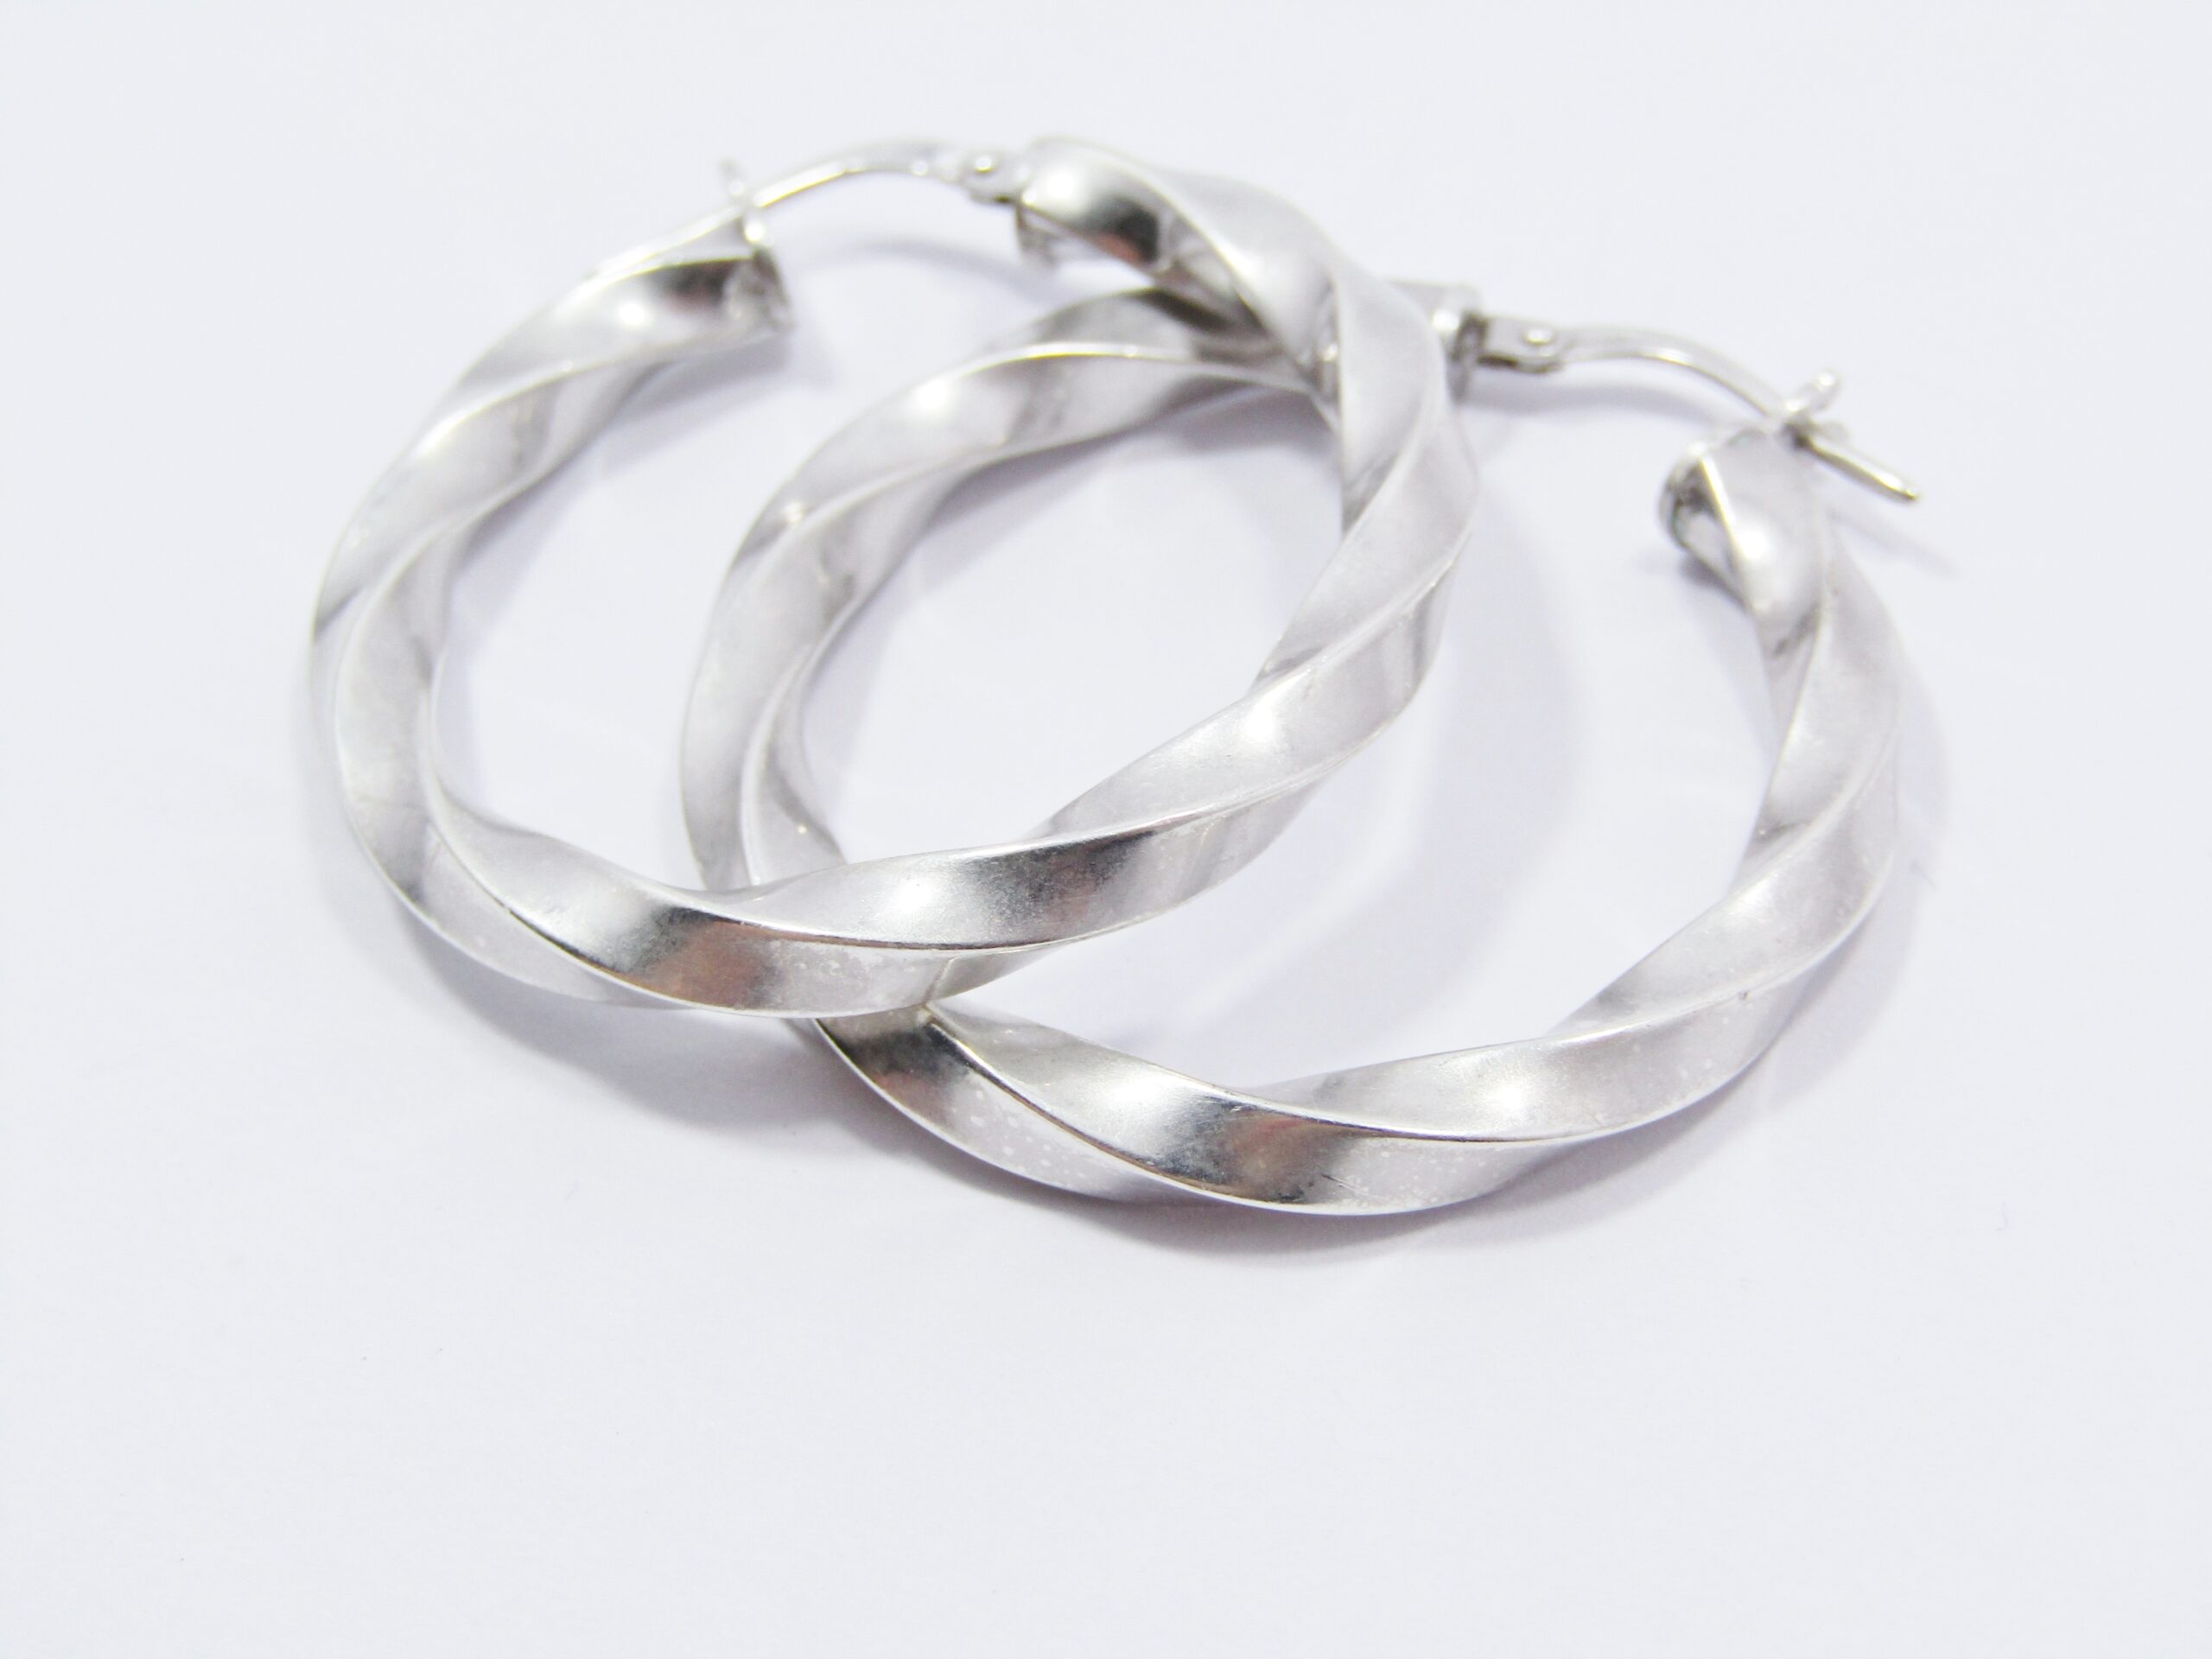 A Gorgeous Pair of Twisted Gypsy Design Earrings in Sterling Silver.